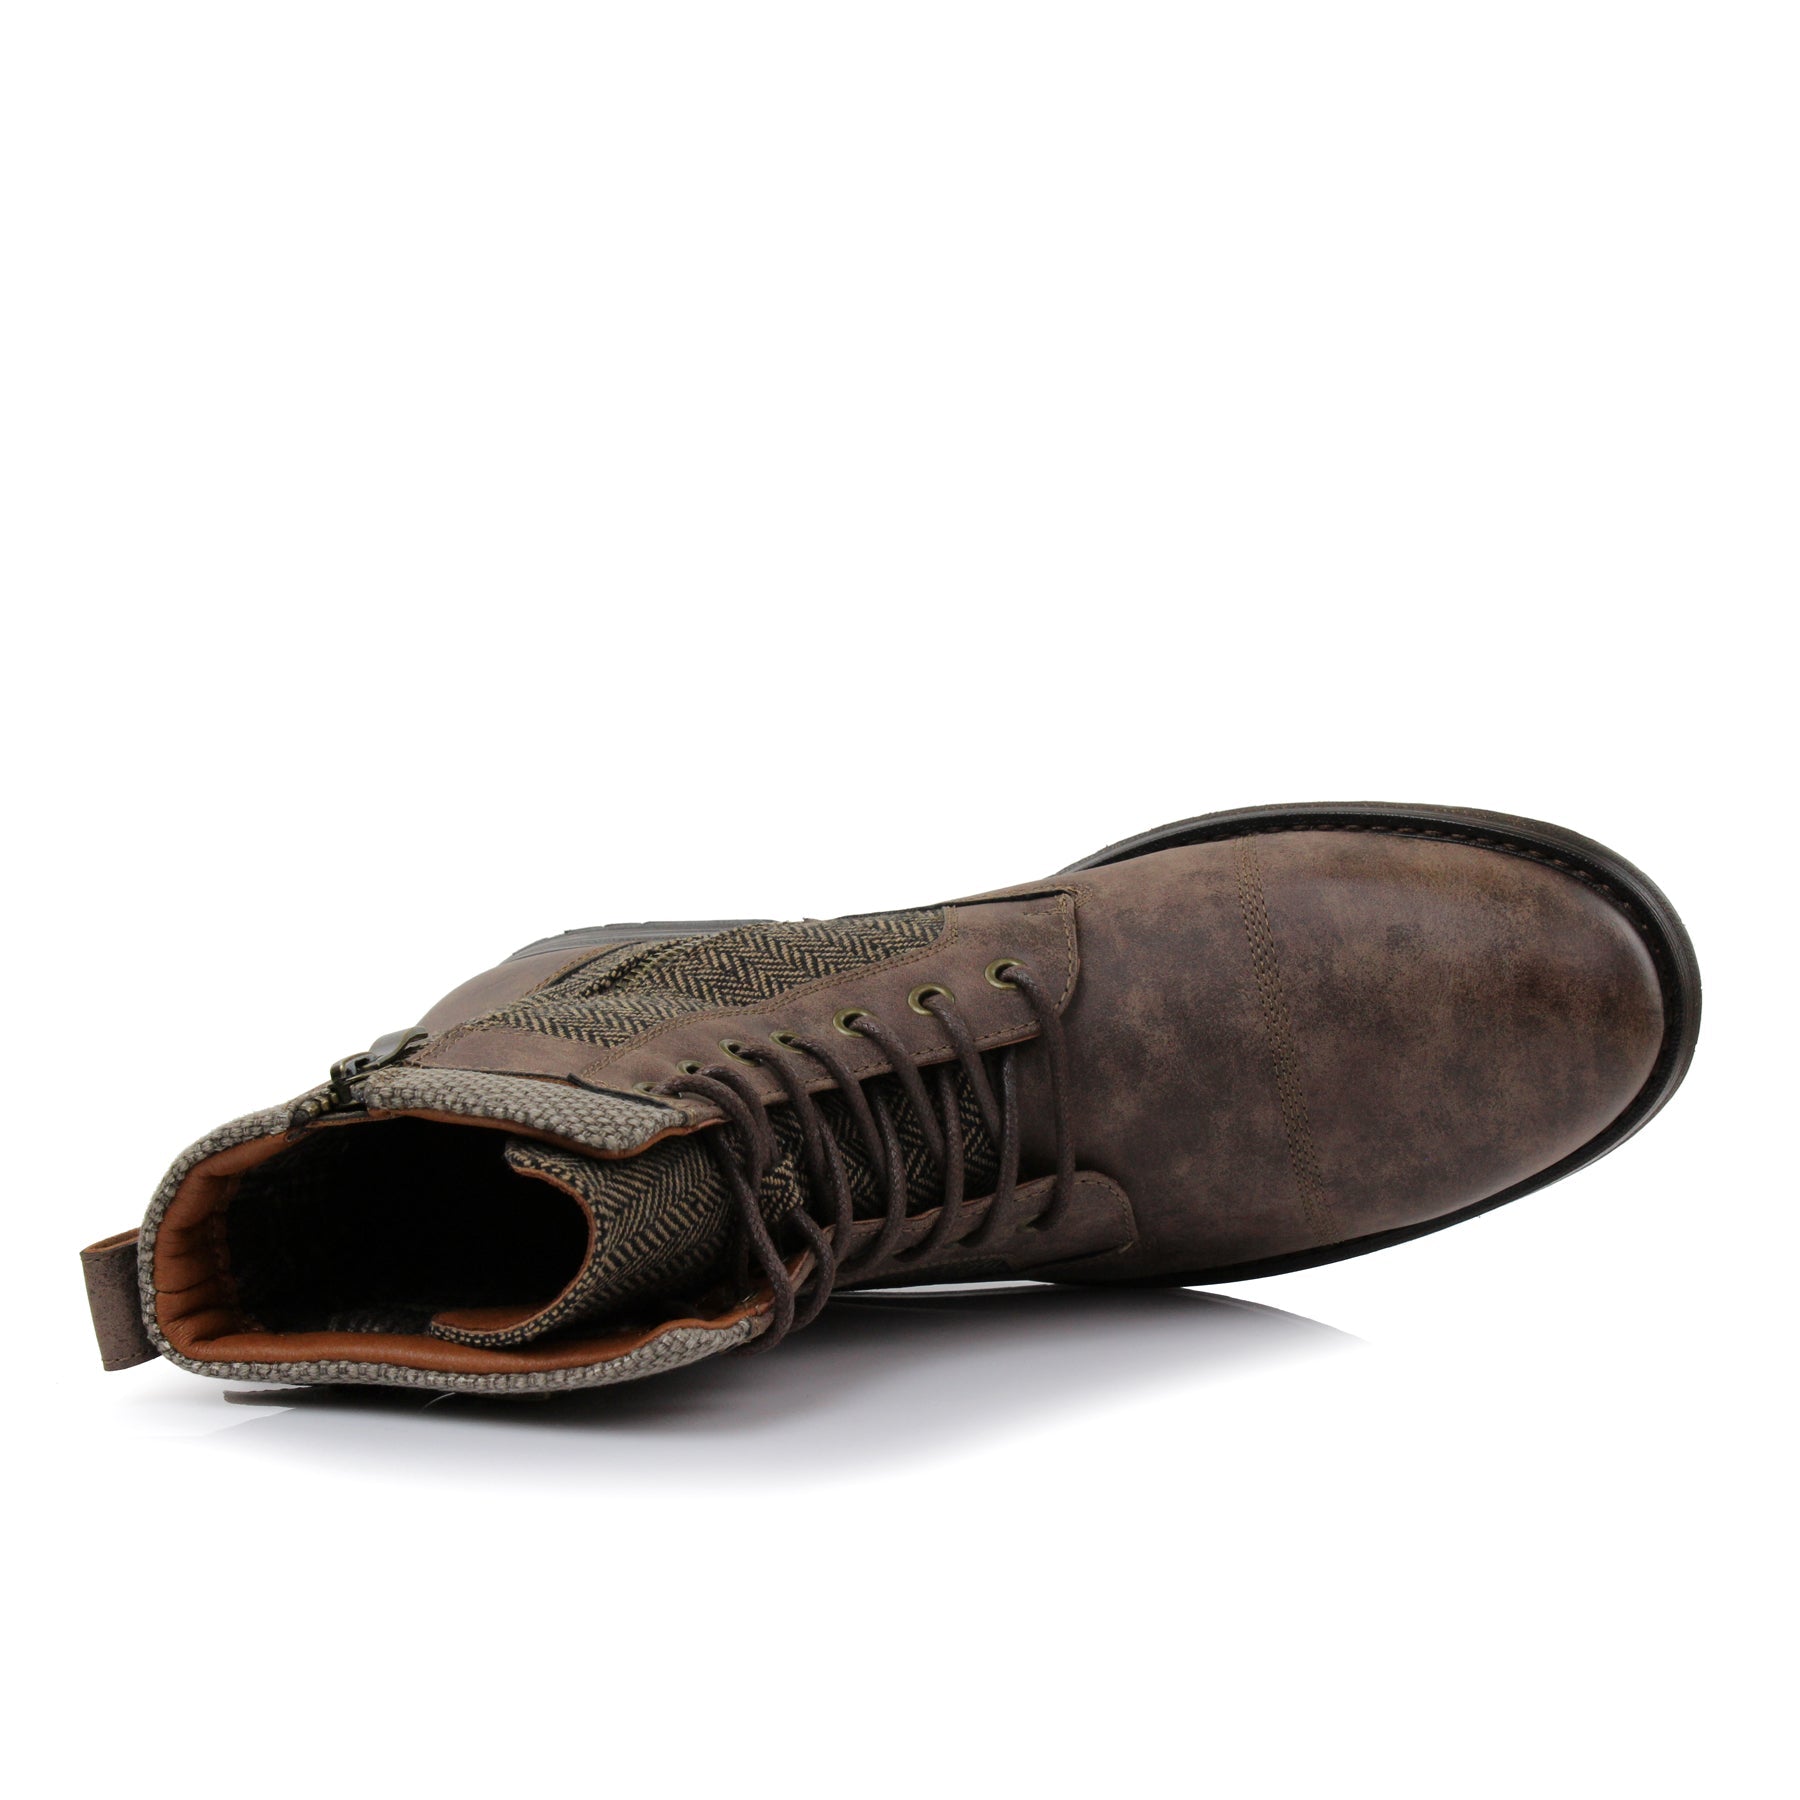 Rugged Duo-Textured Boots | Elijah by Polar Fox | Conal Footwear | Top-Down Angle View